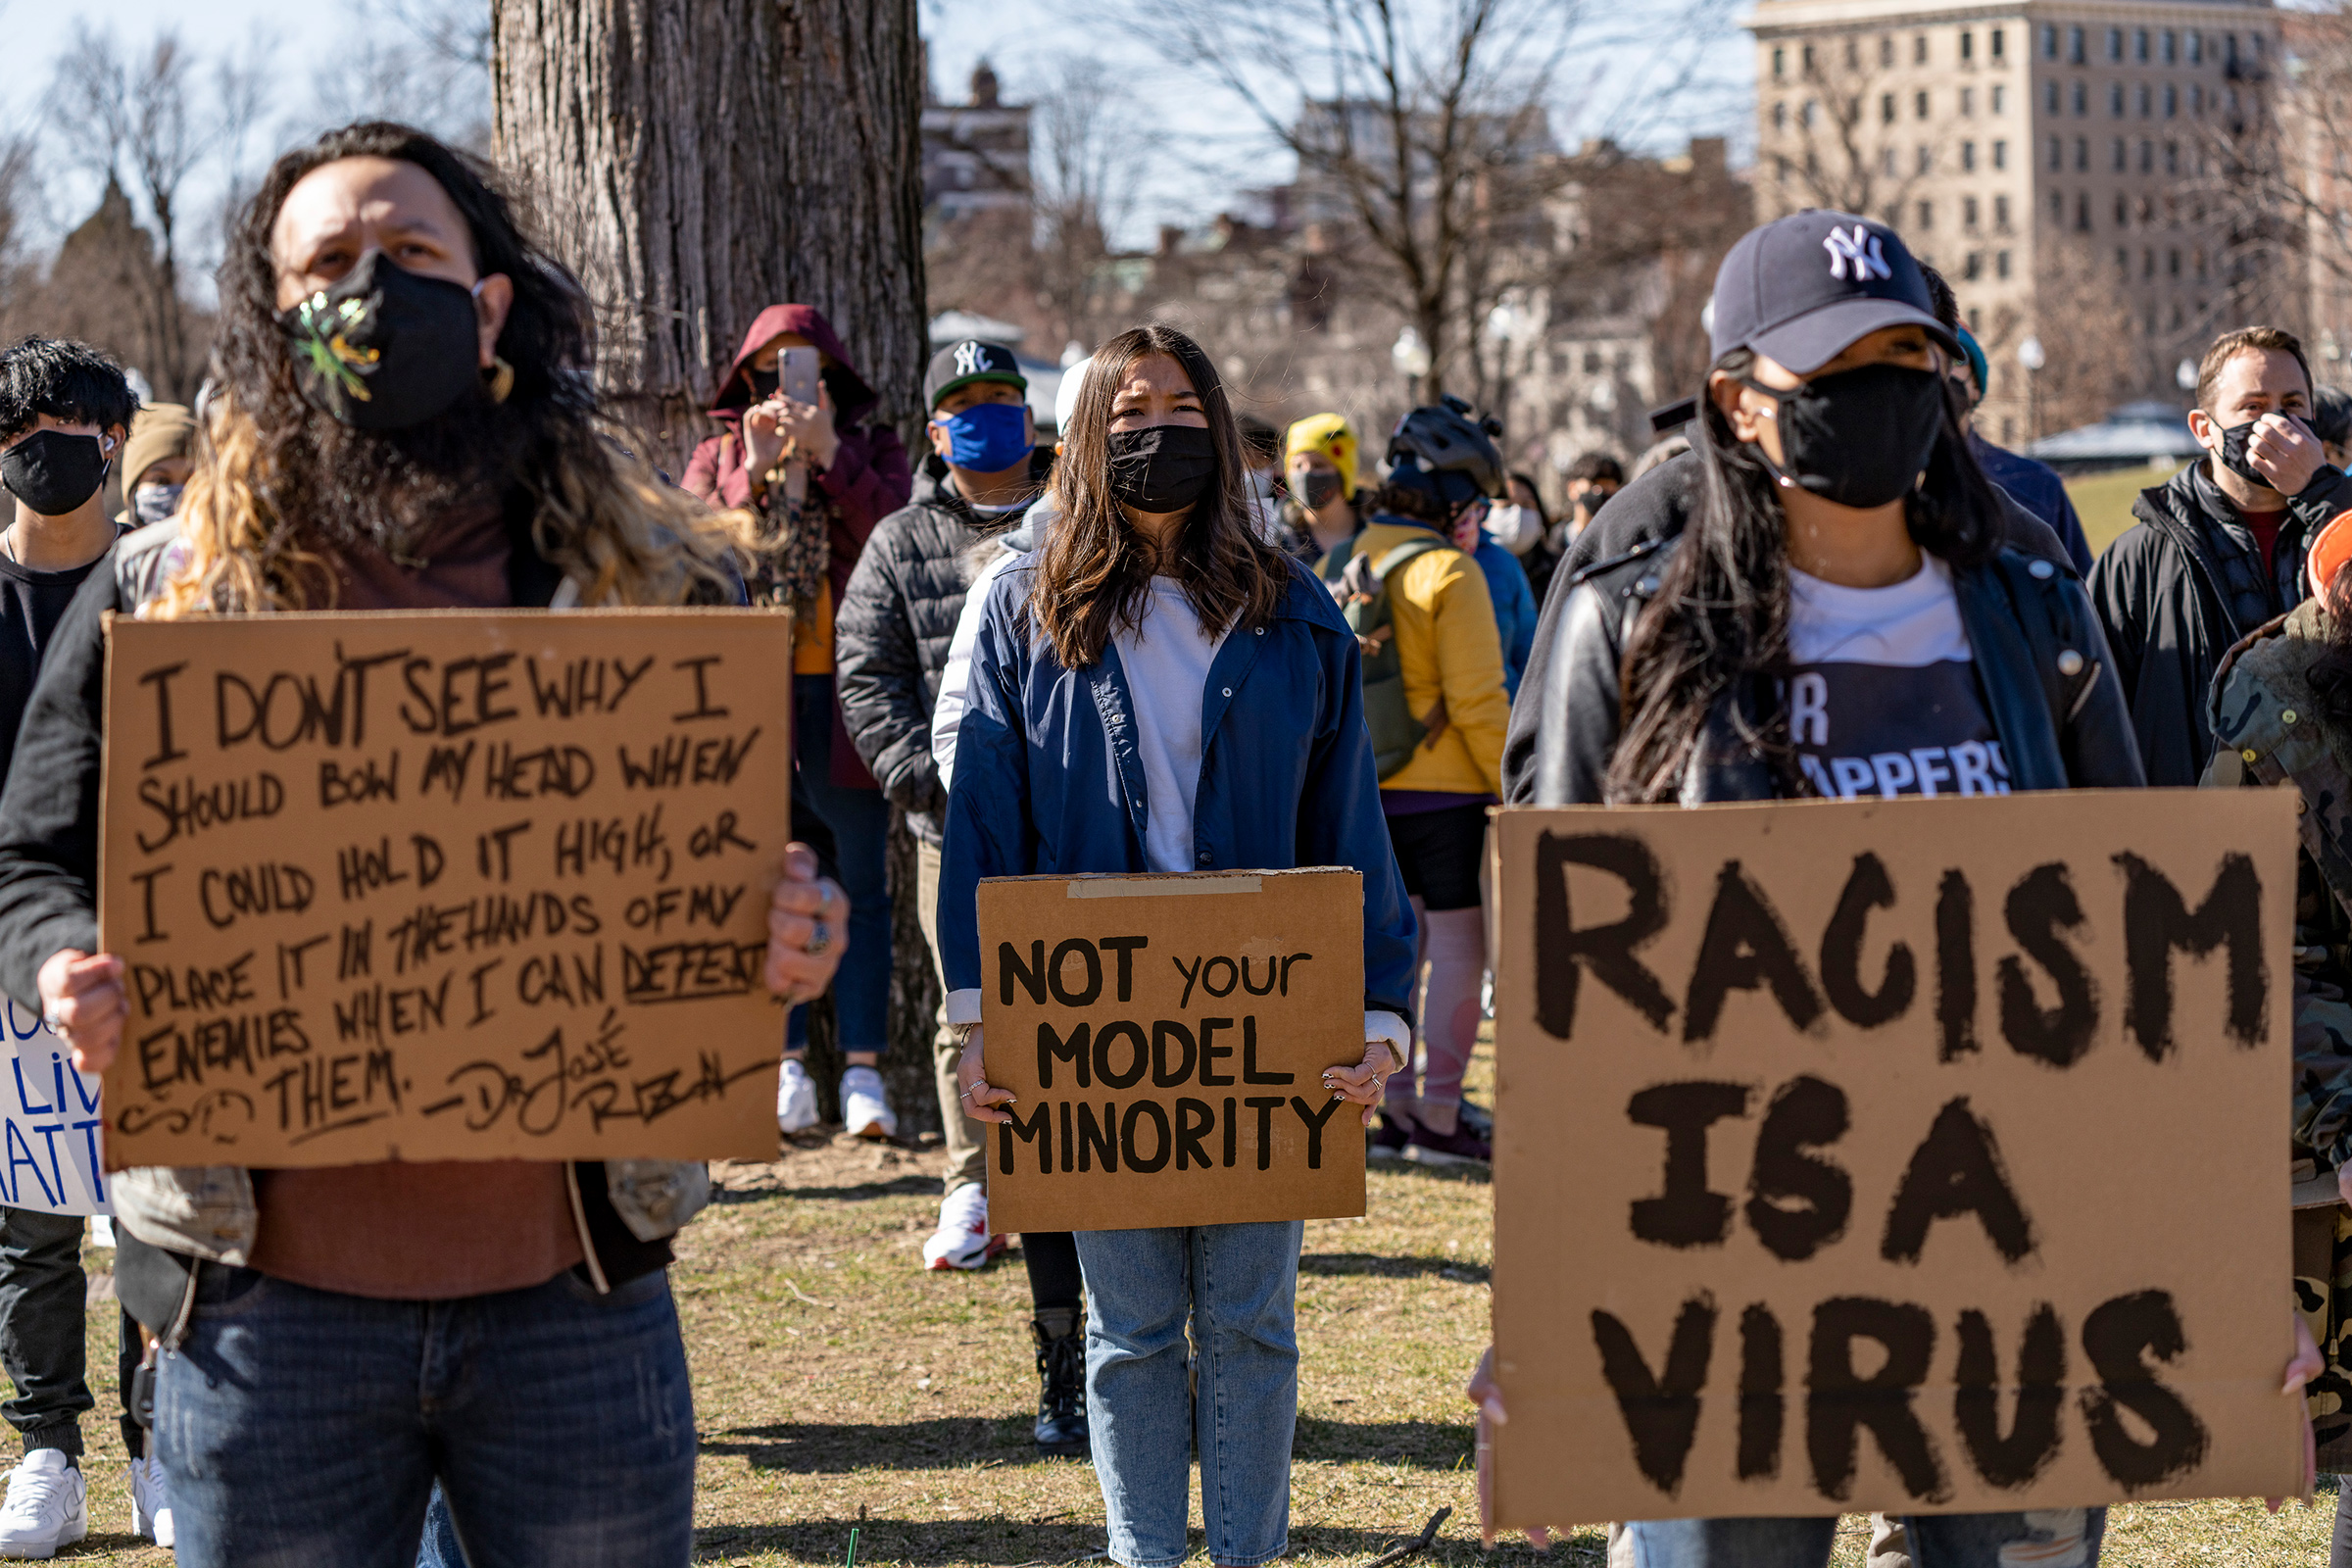 Demonstrators rally against anti-Asian violence and hate crimes in Boston on March 13 (Keiko Hiromi—AFLO/Reuters)